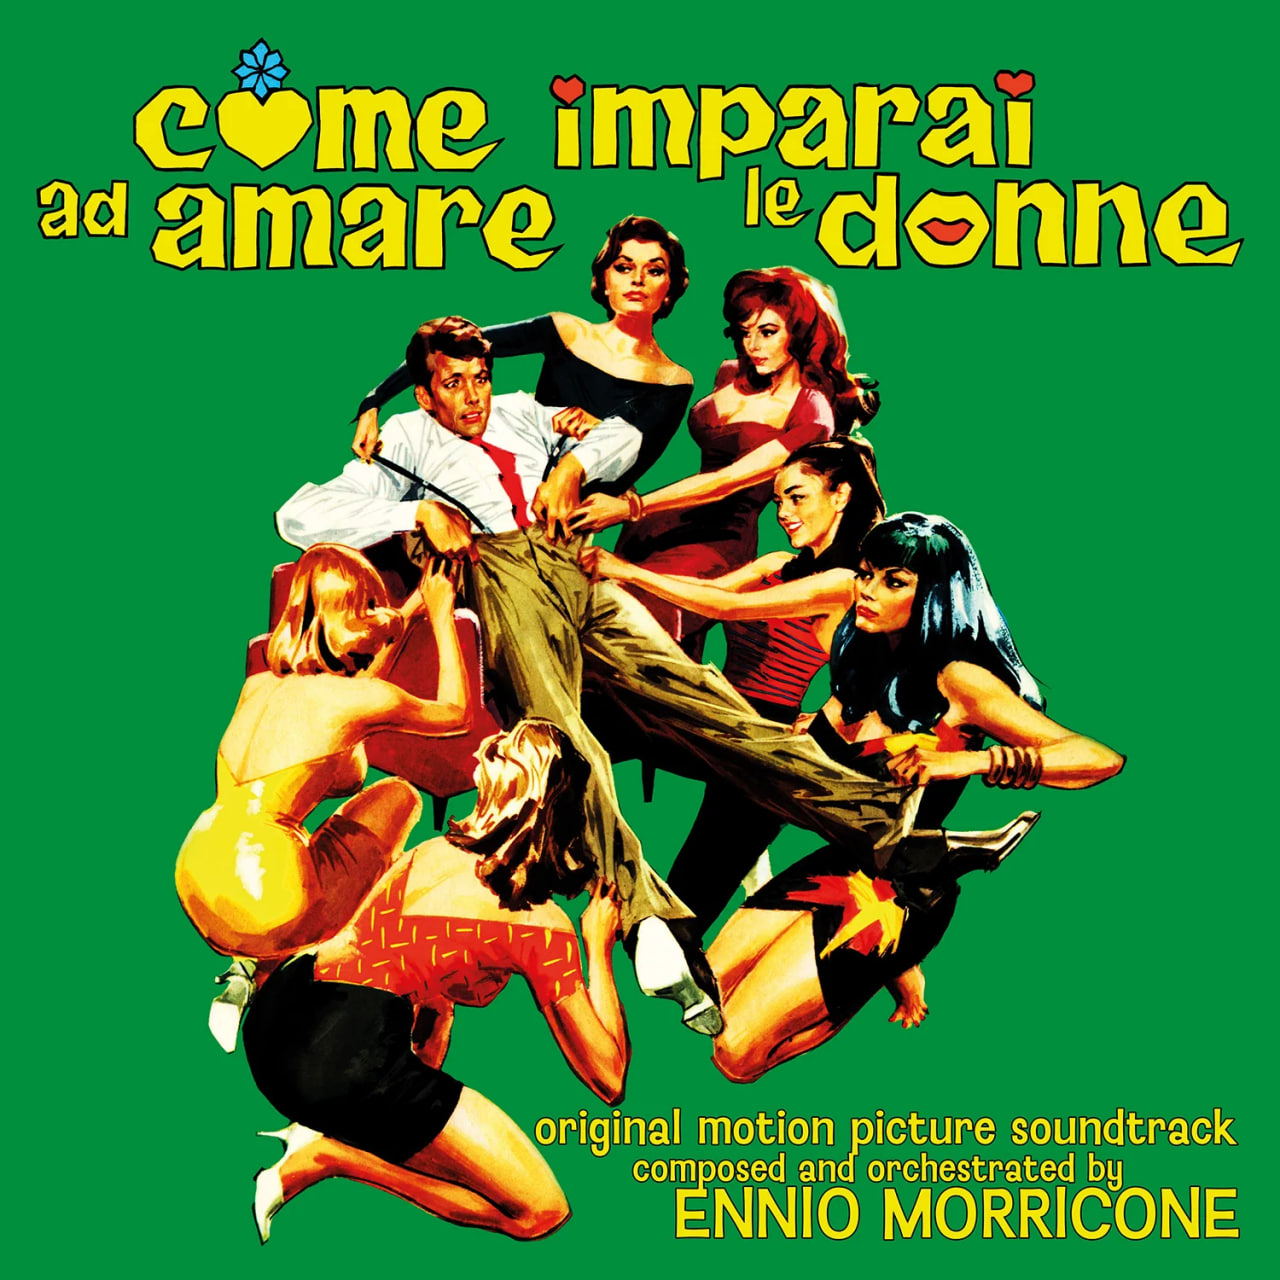 Саундтрек Saar Records OST - Come Imparai Ad Amare Le Donne (Ennio Morricone) (RSD2024, Clear Green Vinyl, 30x30cm insert LP) free shipping 60pcs 6mm 7mm 8mm 9mm 12mm 15mm safety animal nose in brownplastic for doll come with washers each size 10pcs